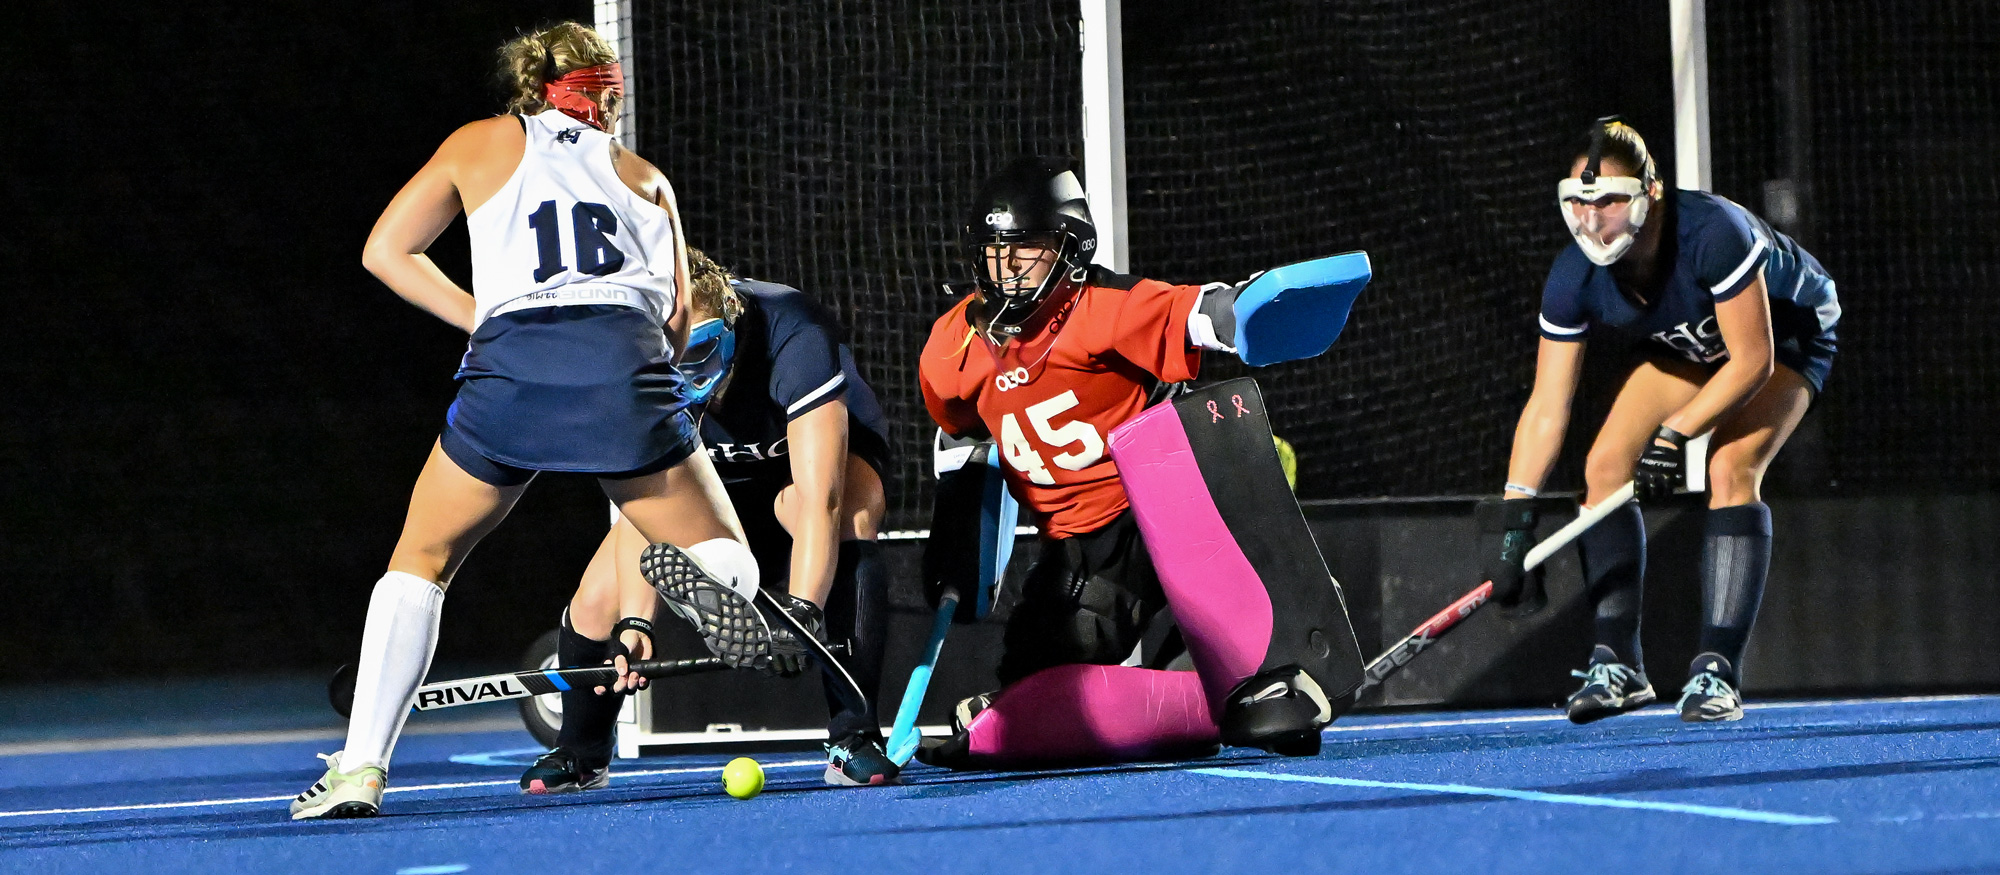 Rachel Katzenberg had a career-high 25 saves in Mount Holyoke's loss to No. 2 Babson on Oct. 28, 2023. (RJB Sports file photo)